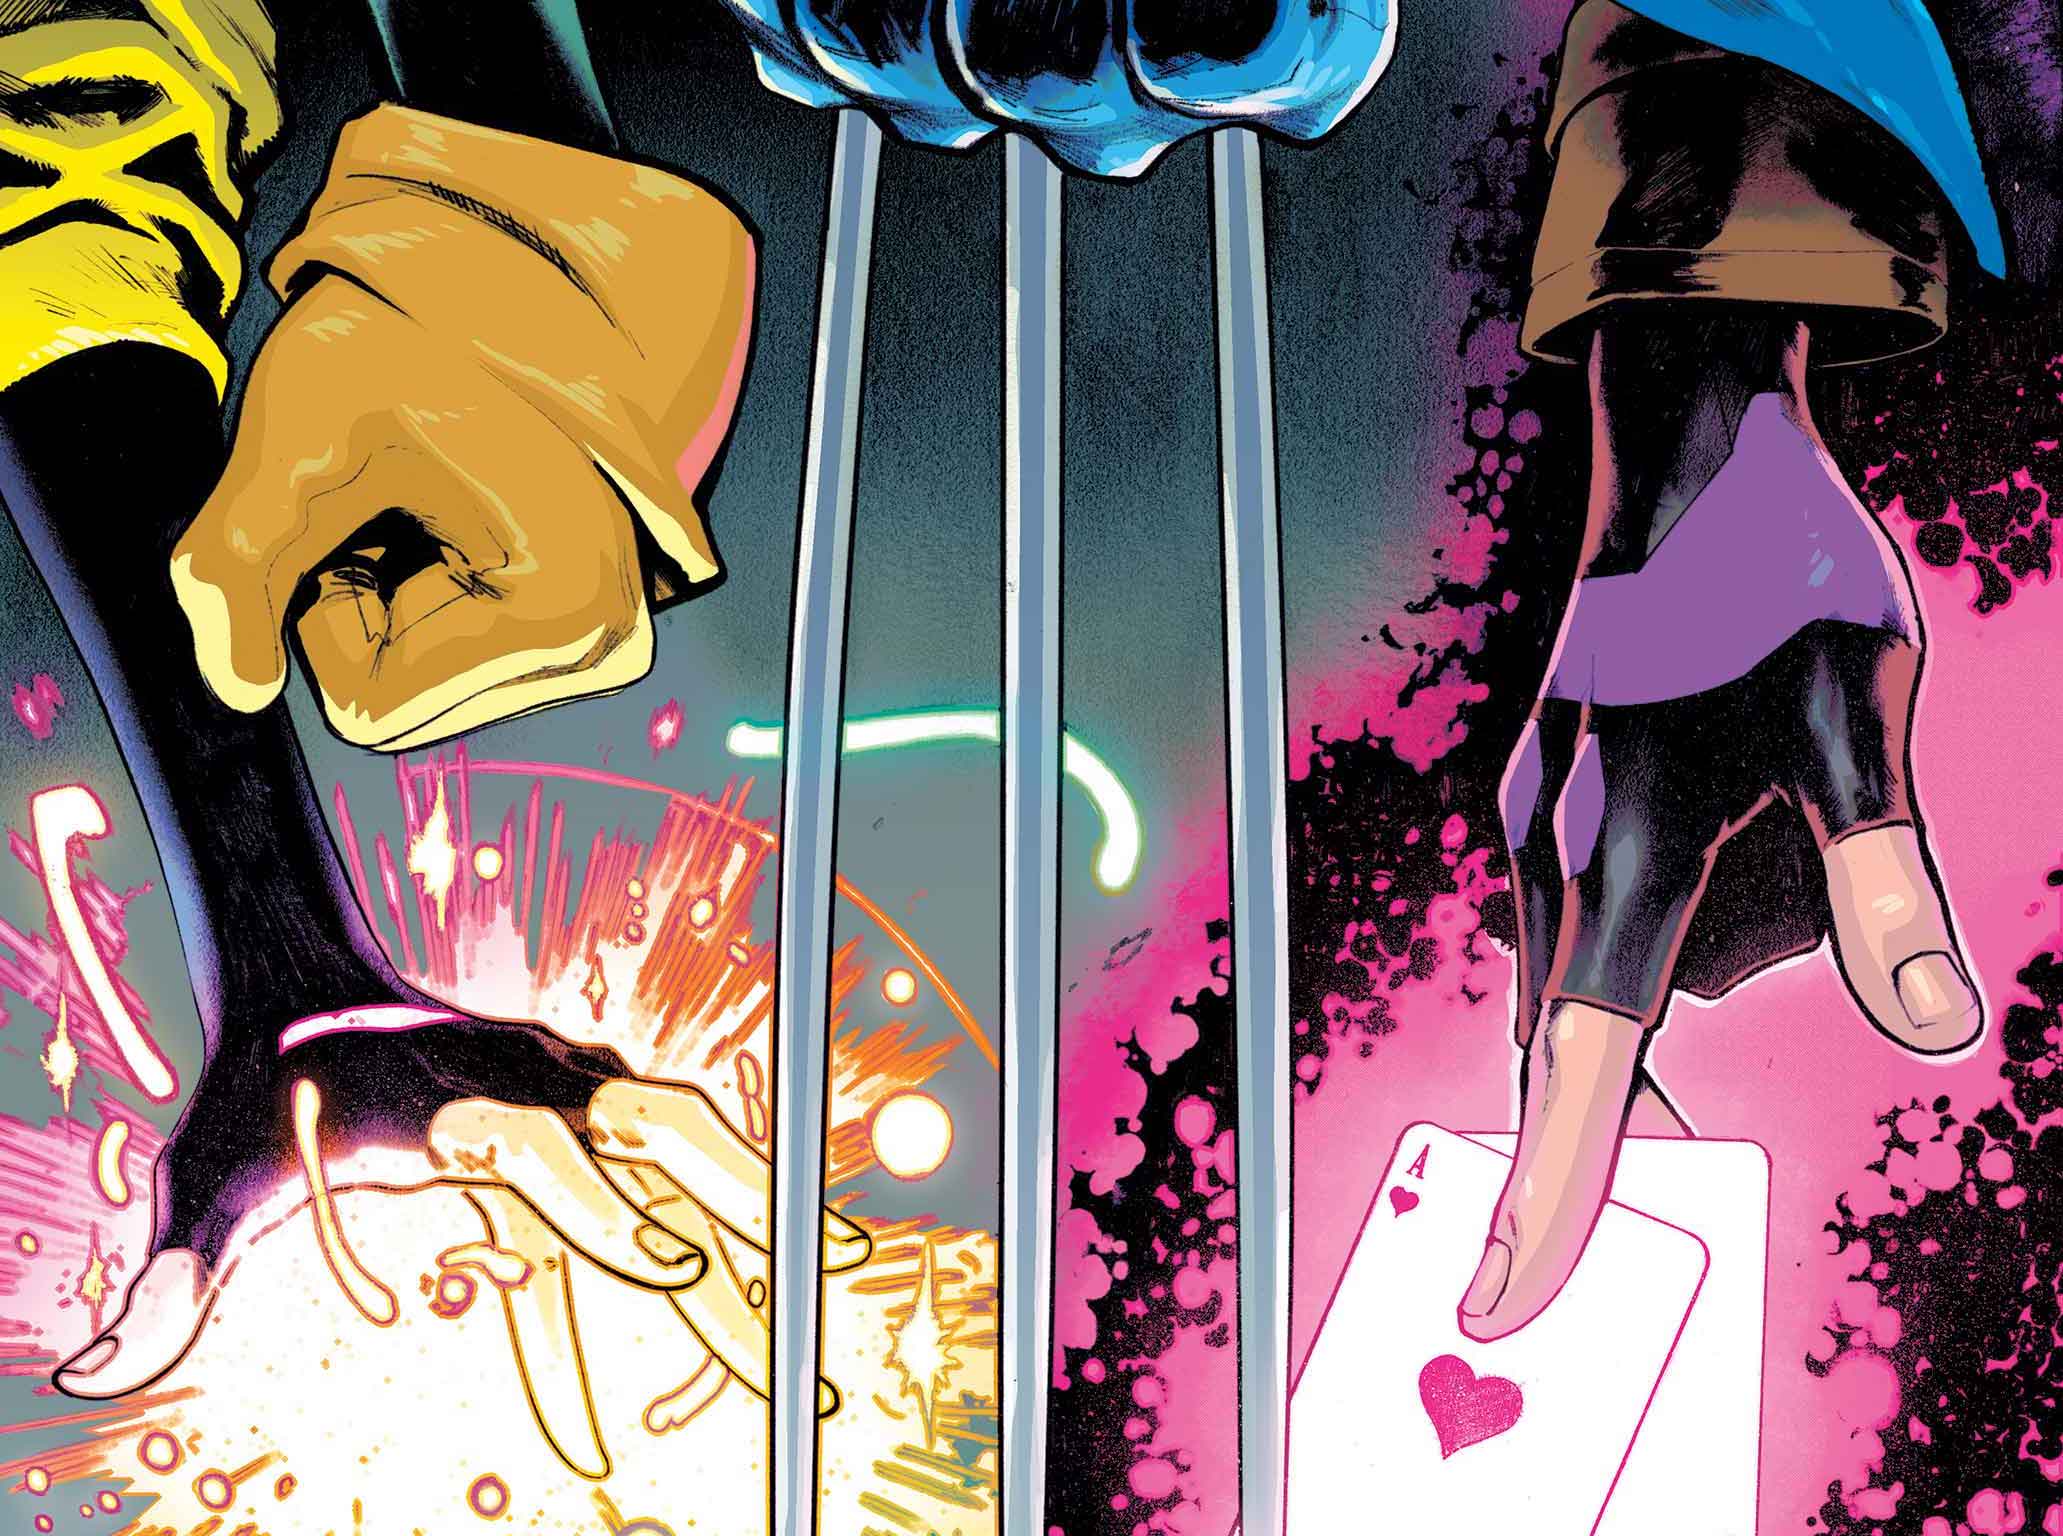 New details and art emerge for 'Uncanny X-Men' #1